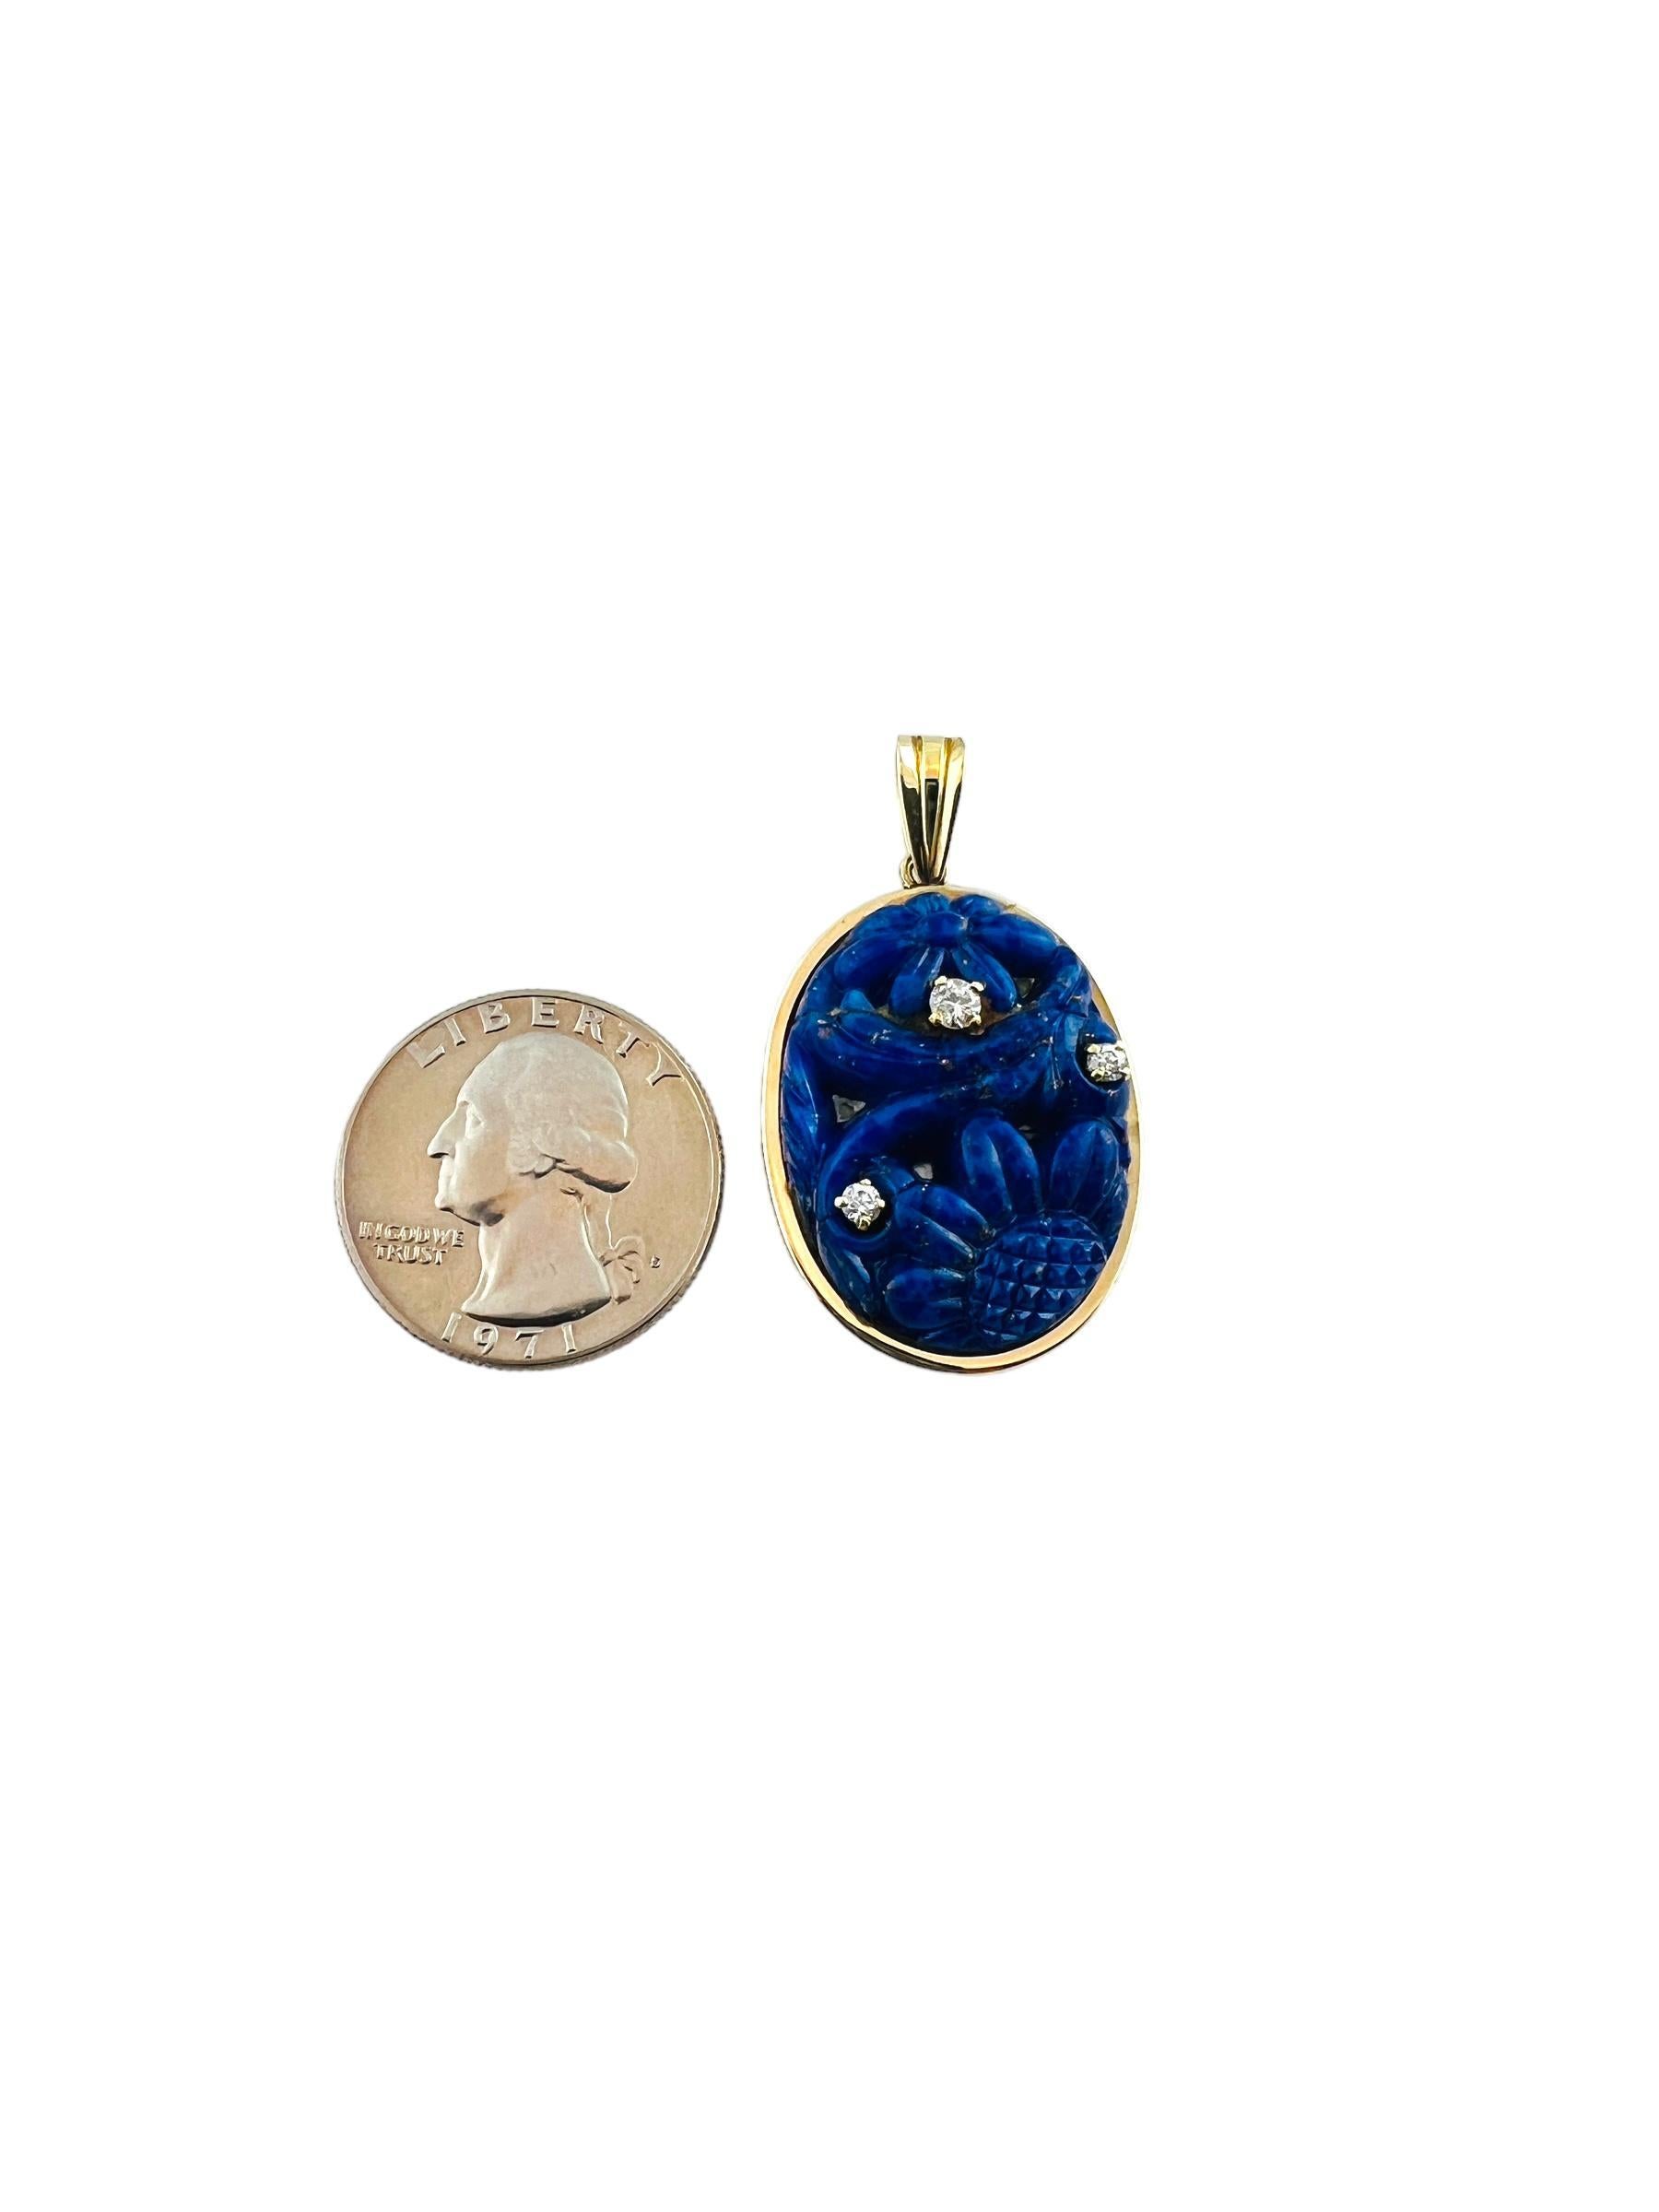 Antique 14K Yellow Gold Carved Lapis Lazuli and Diamond Pendant #15999 For Sale 3